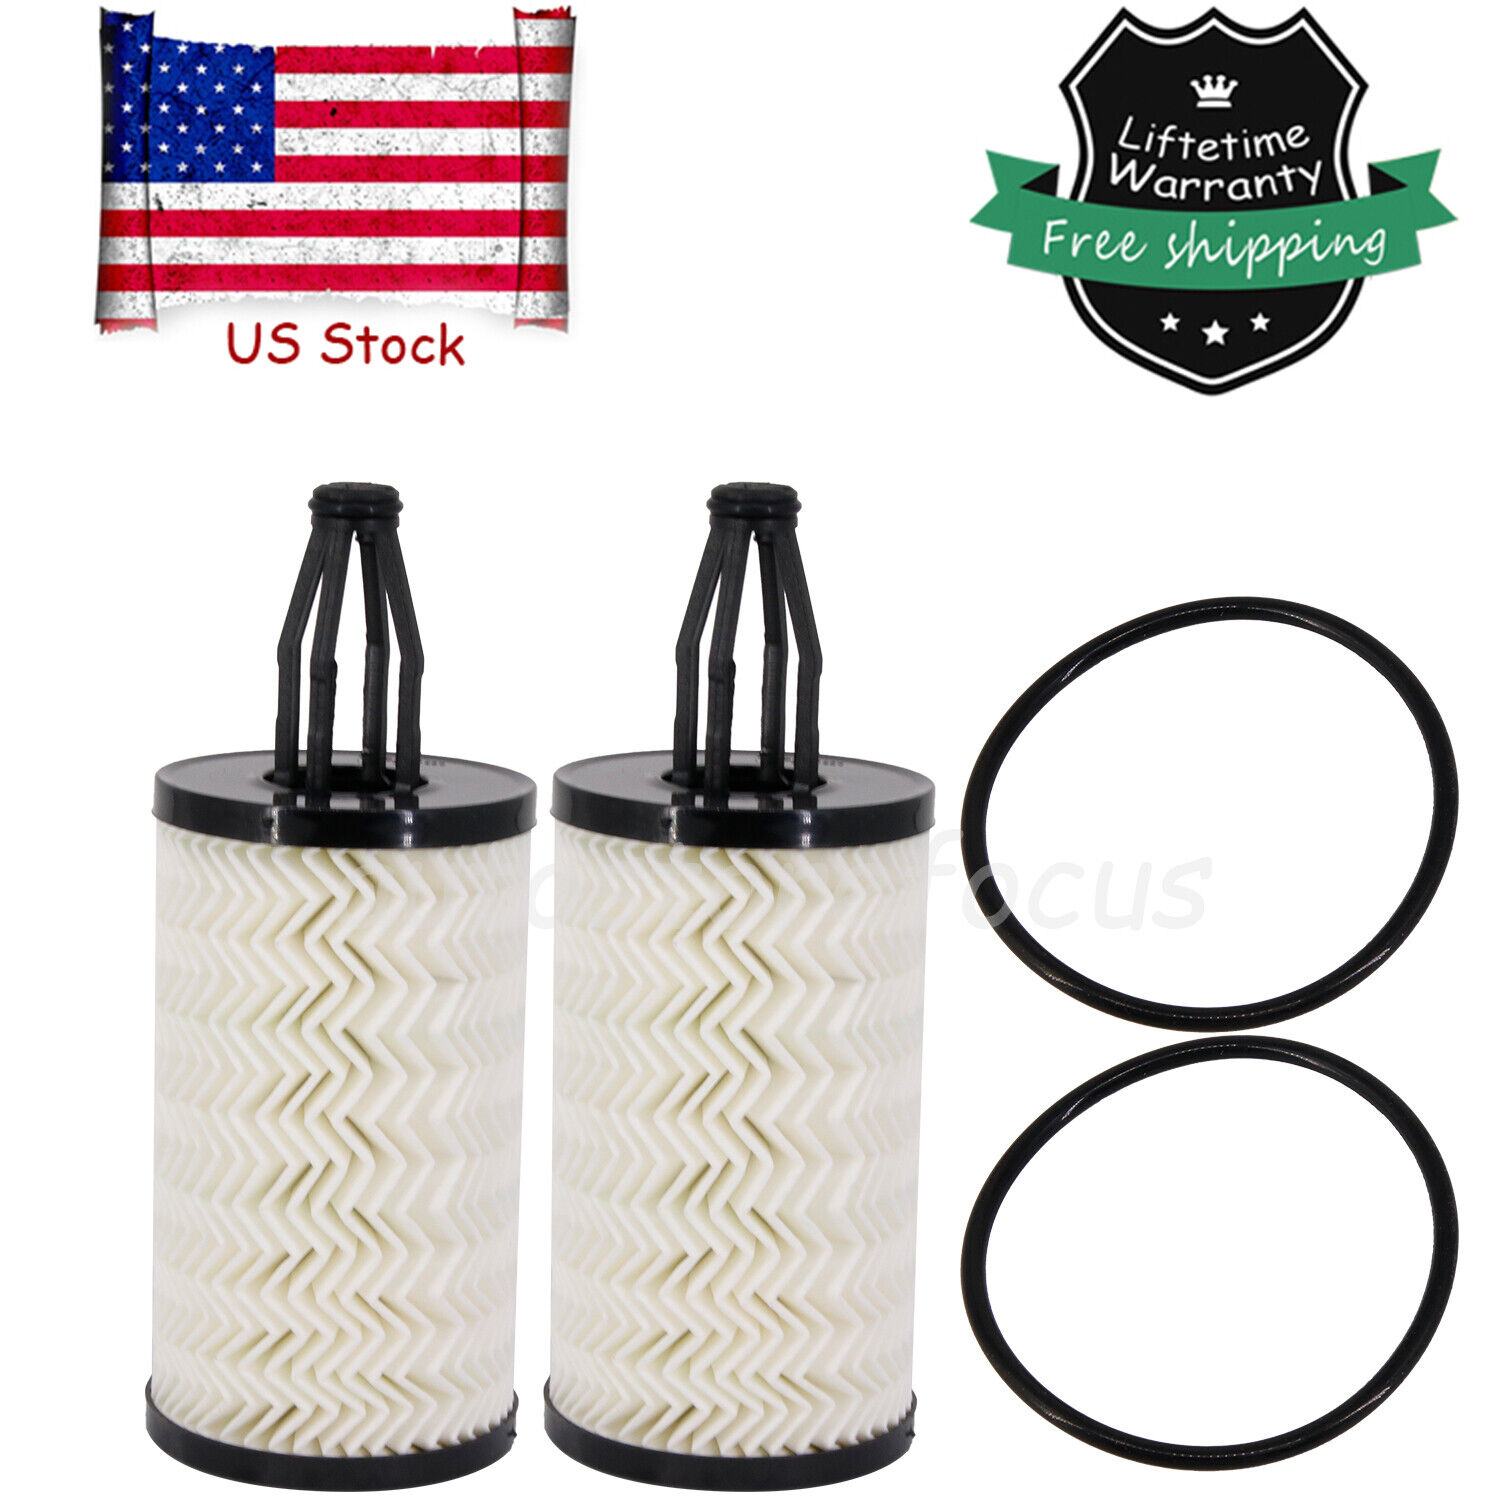 2X Engine Oil Filter 2761800009 Fits For Mercedes Benz E400 GL550 ML350 SL400 US